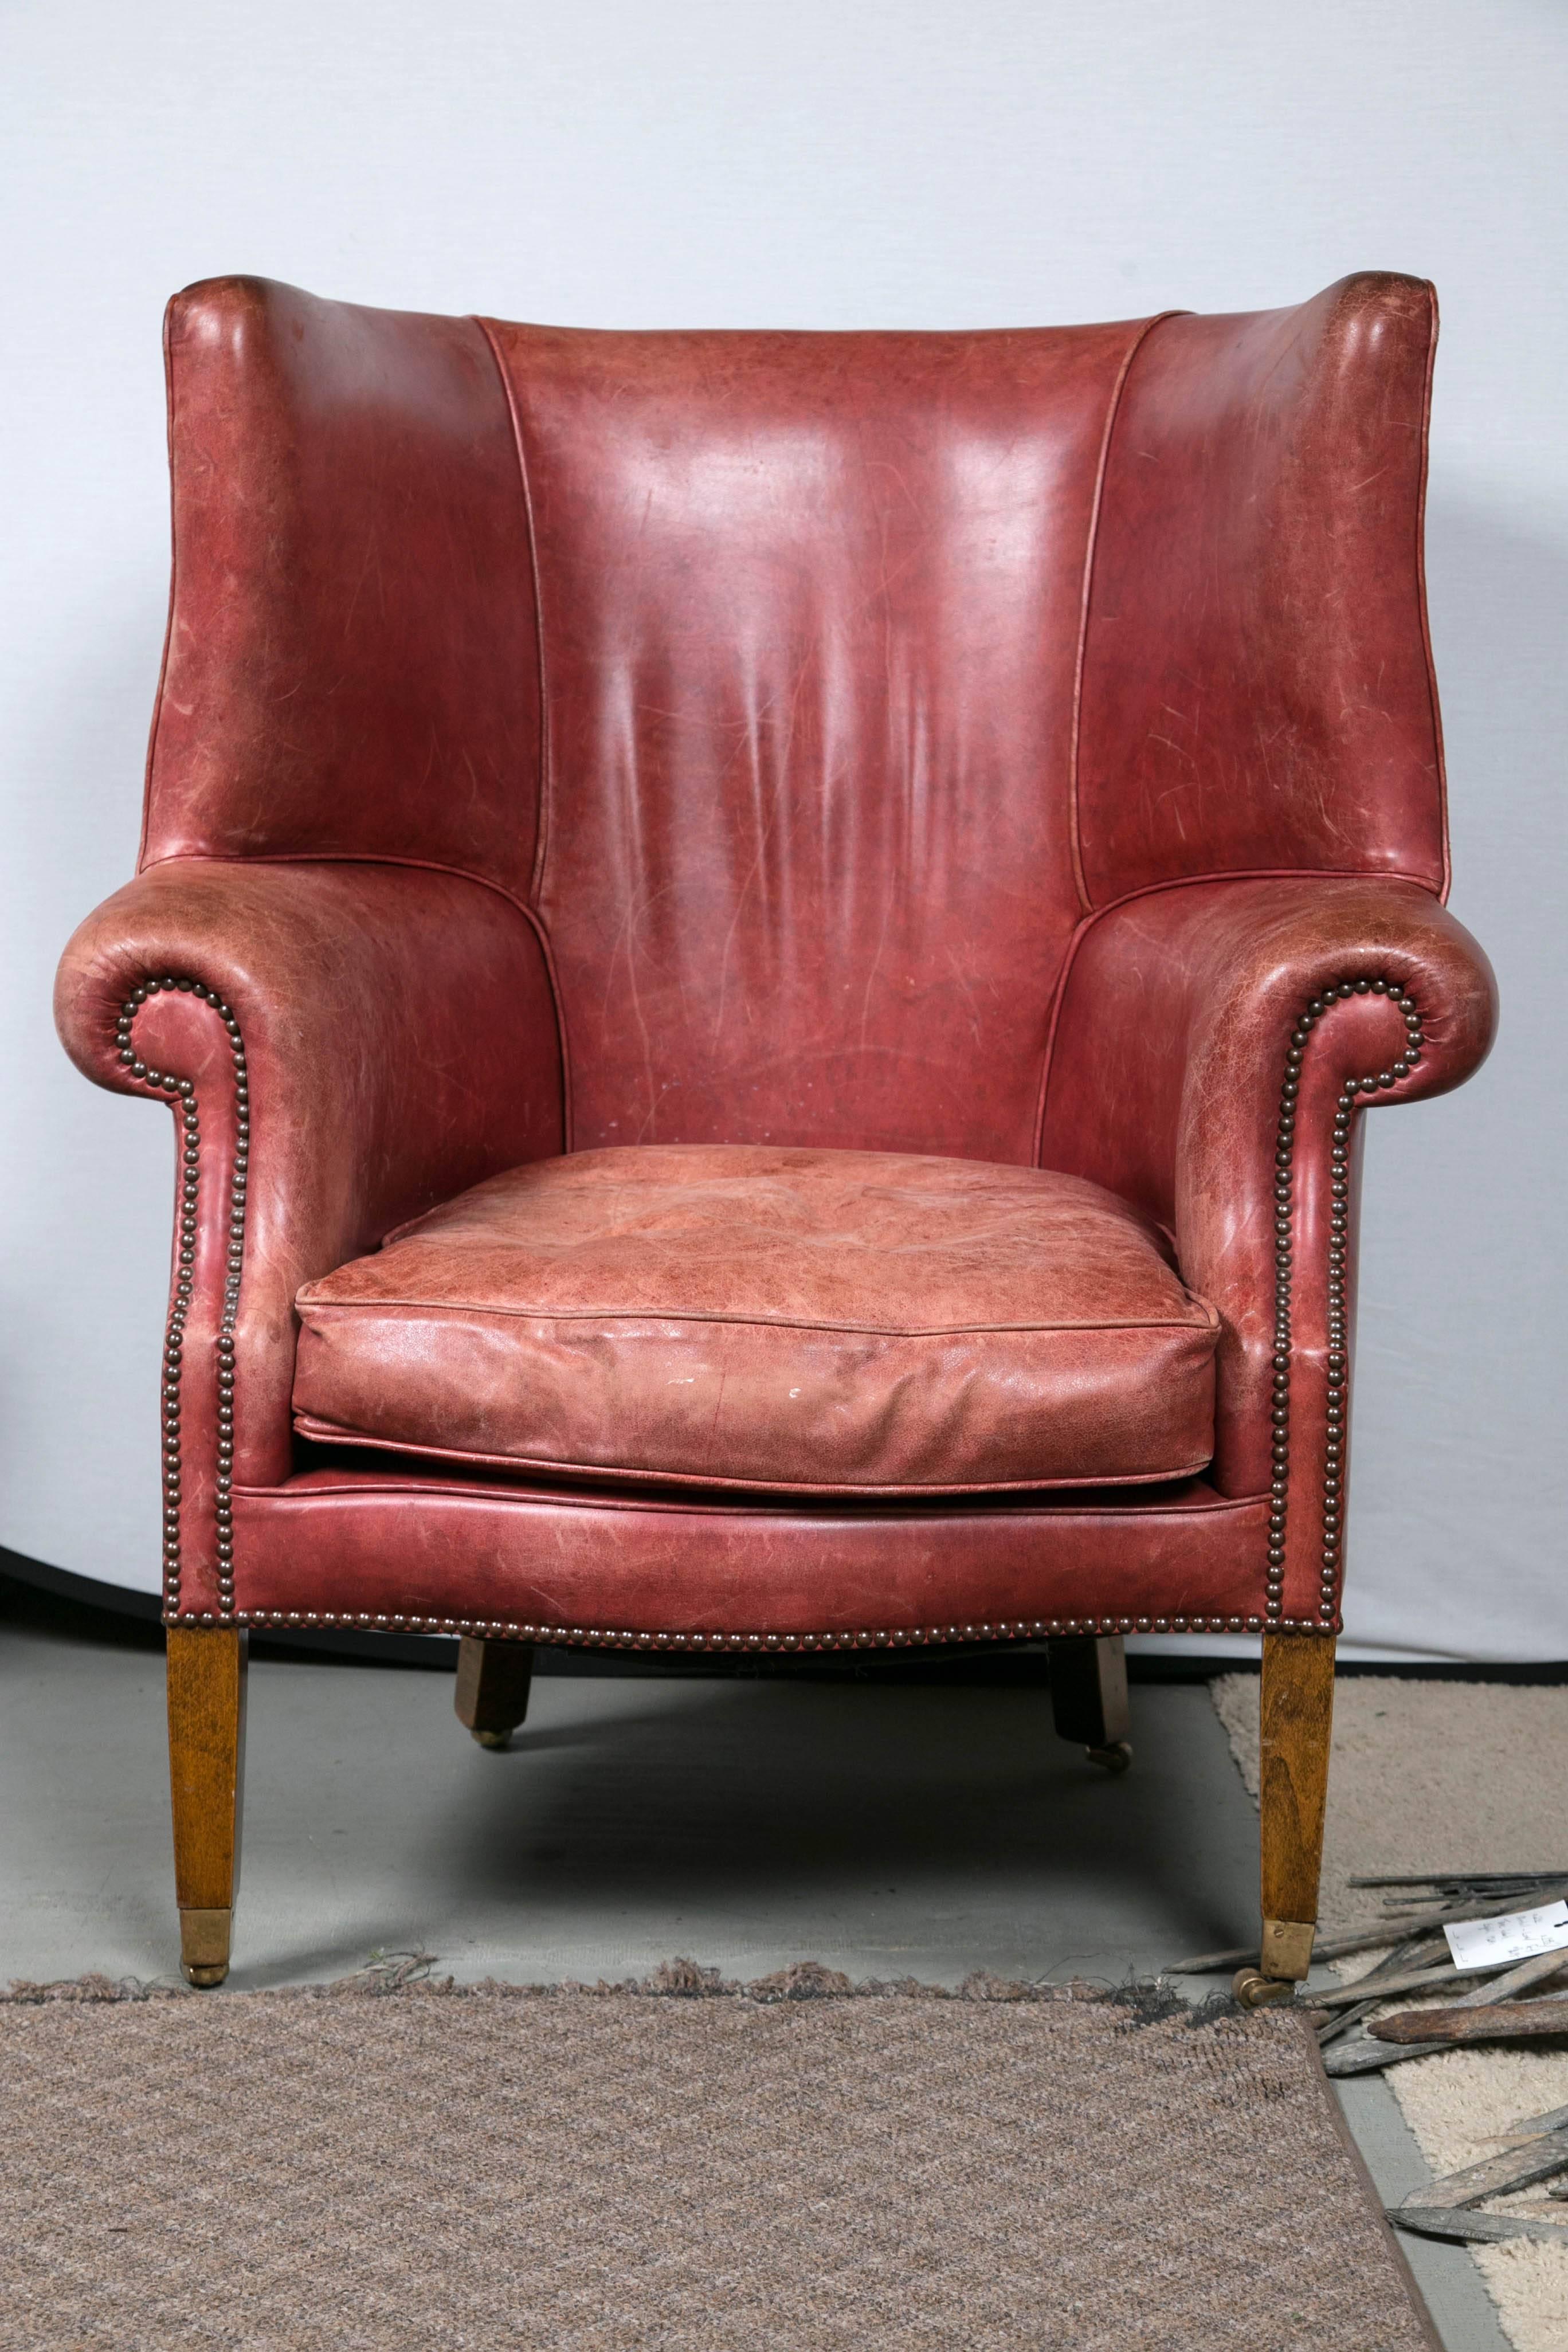 Red Leather Wing Chair In Excellent Condition For Sale In Stamford, CT